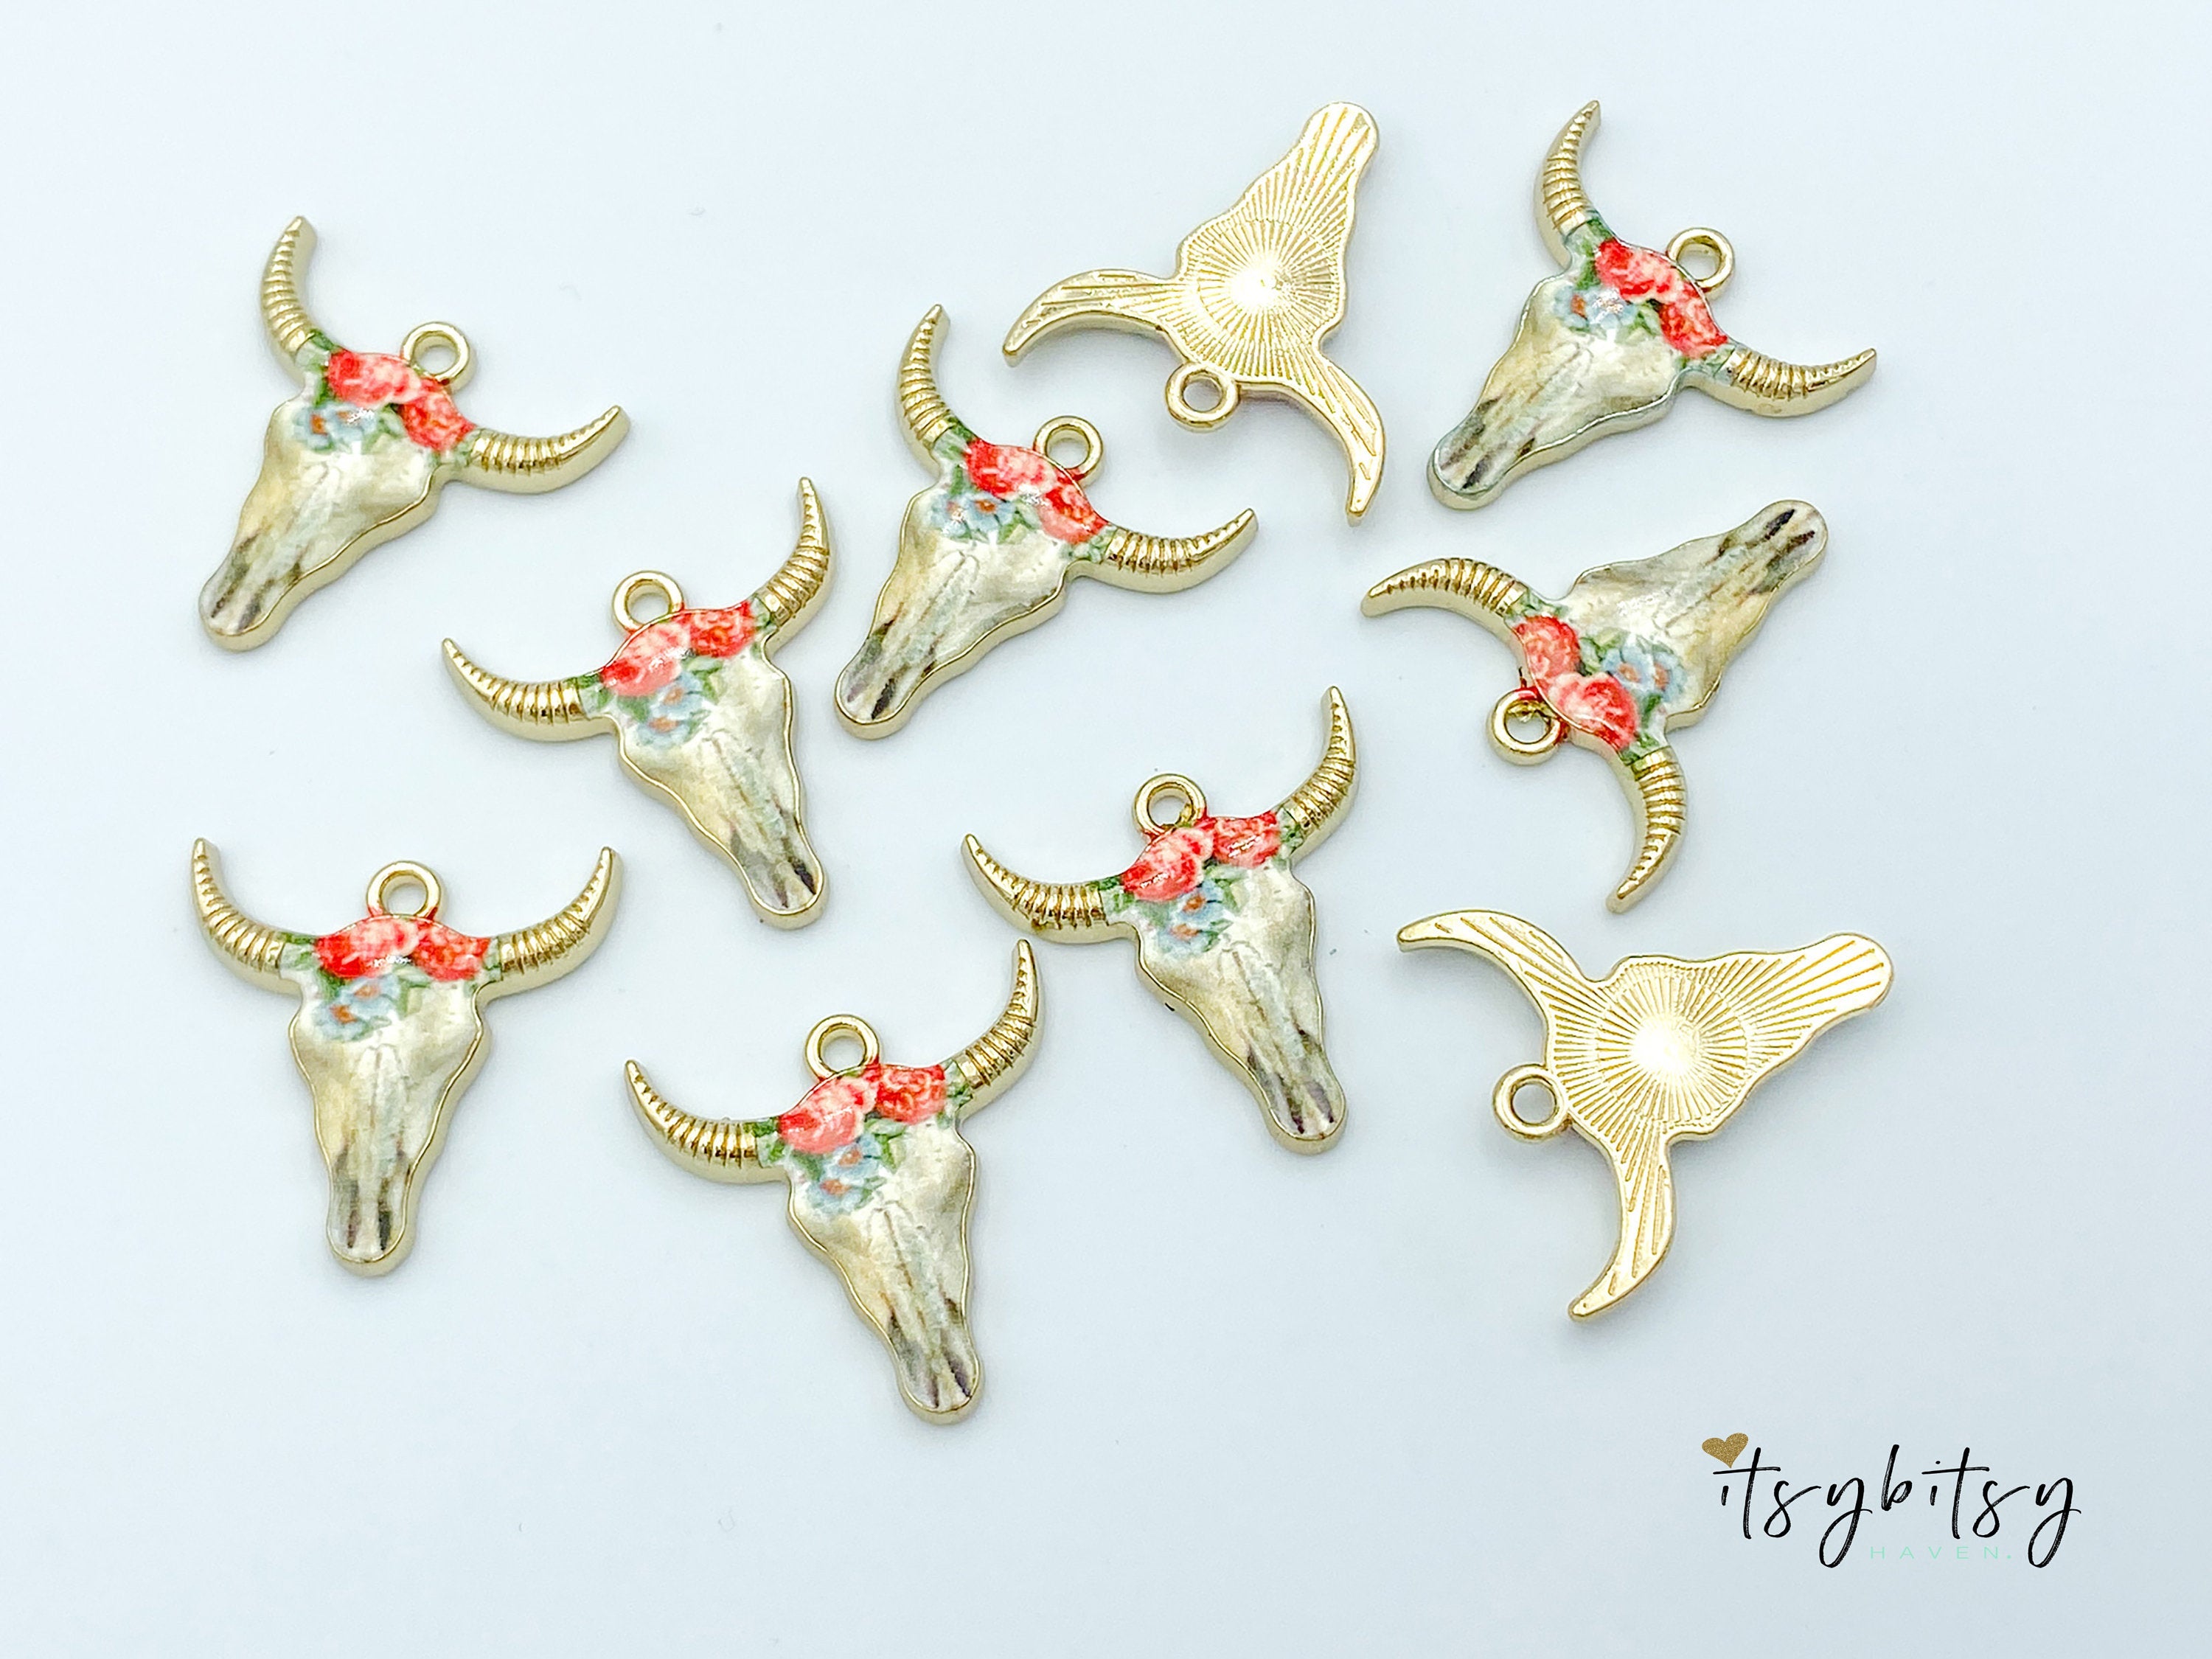 2pcs, 22x21mm, Zinc Based Alloy Bohemian Boho Charms Bull Cow Animal charm in Gold Plating, Coral and Light Blue Floral Enamel